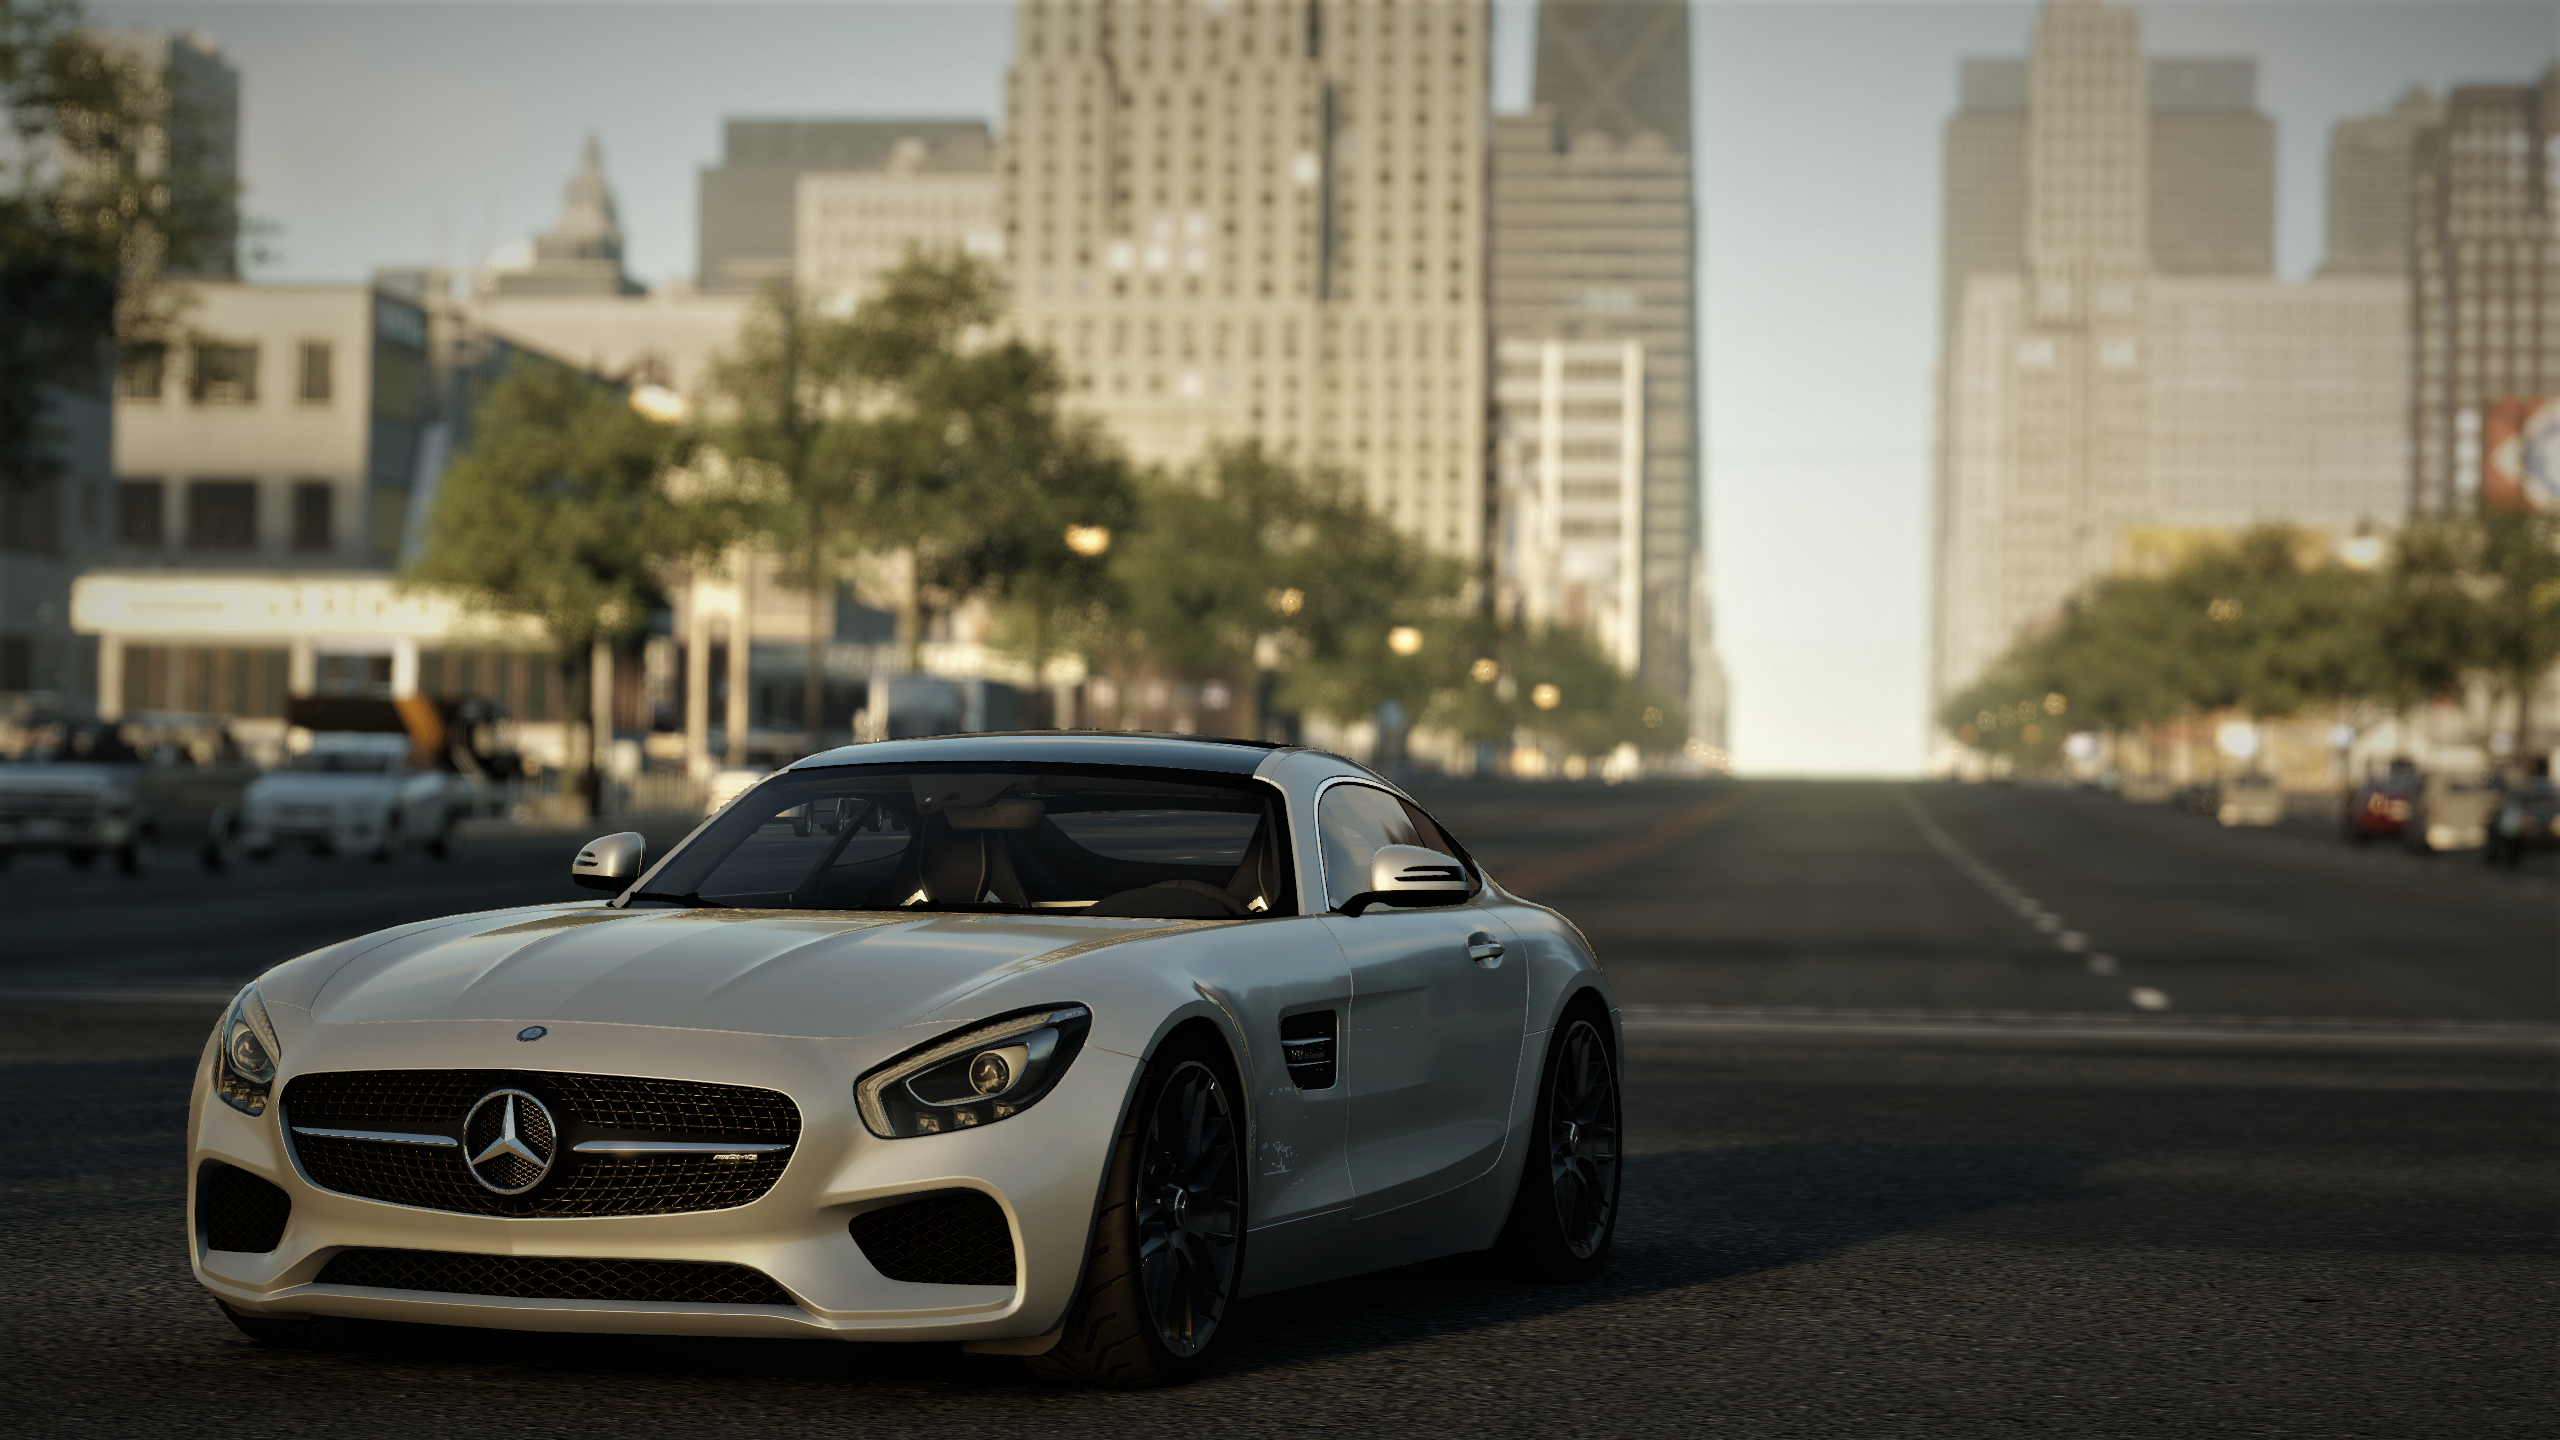 Mercedes Benz Car Grey Grey Cars Detroit Mercedes AMG GT Front Angle View 2560x1440